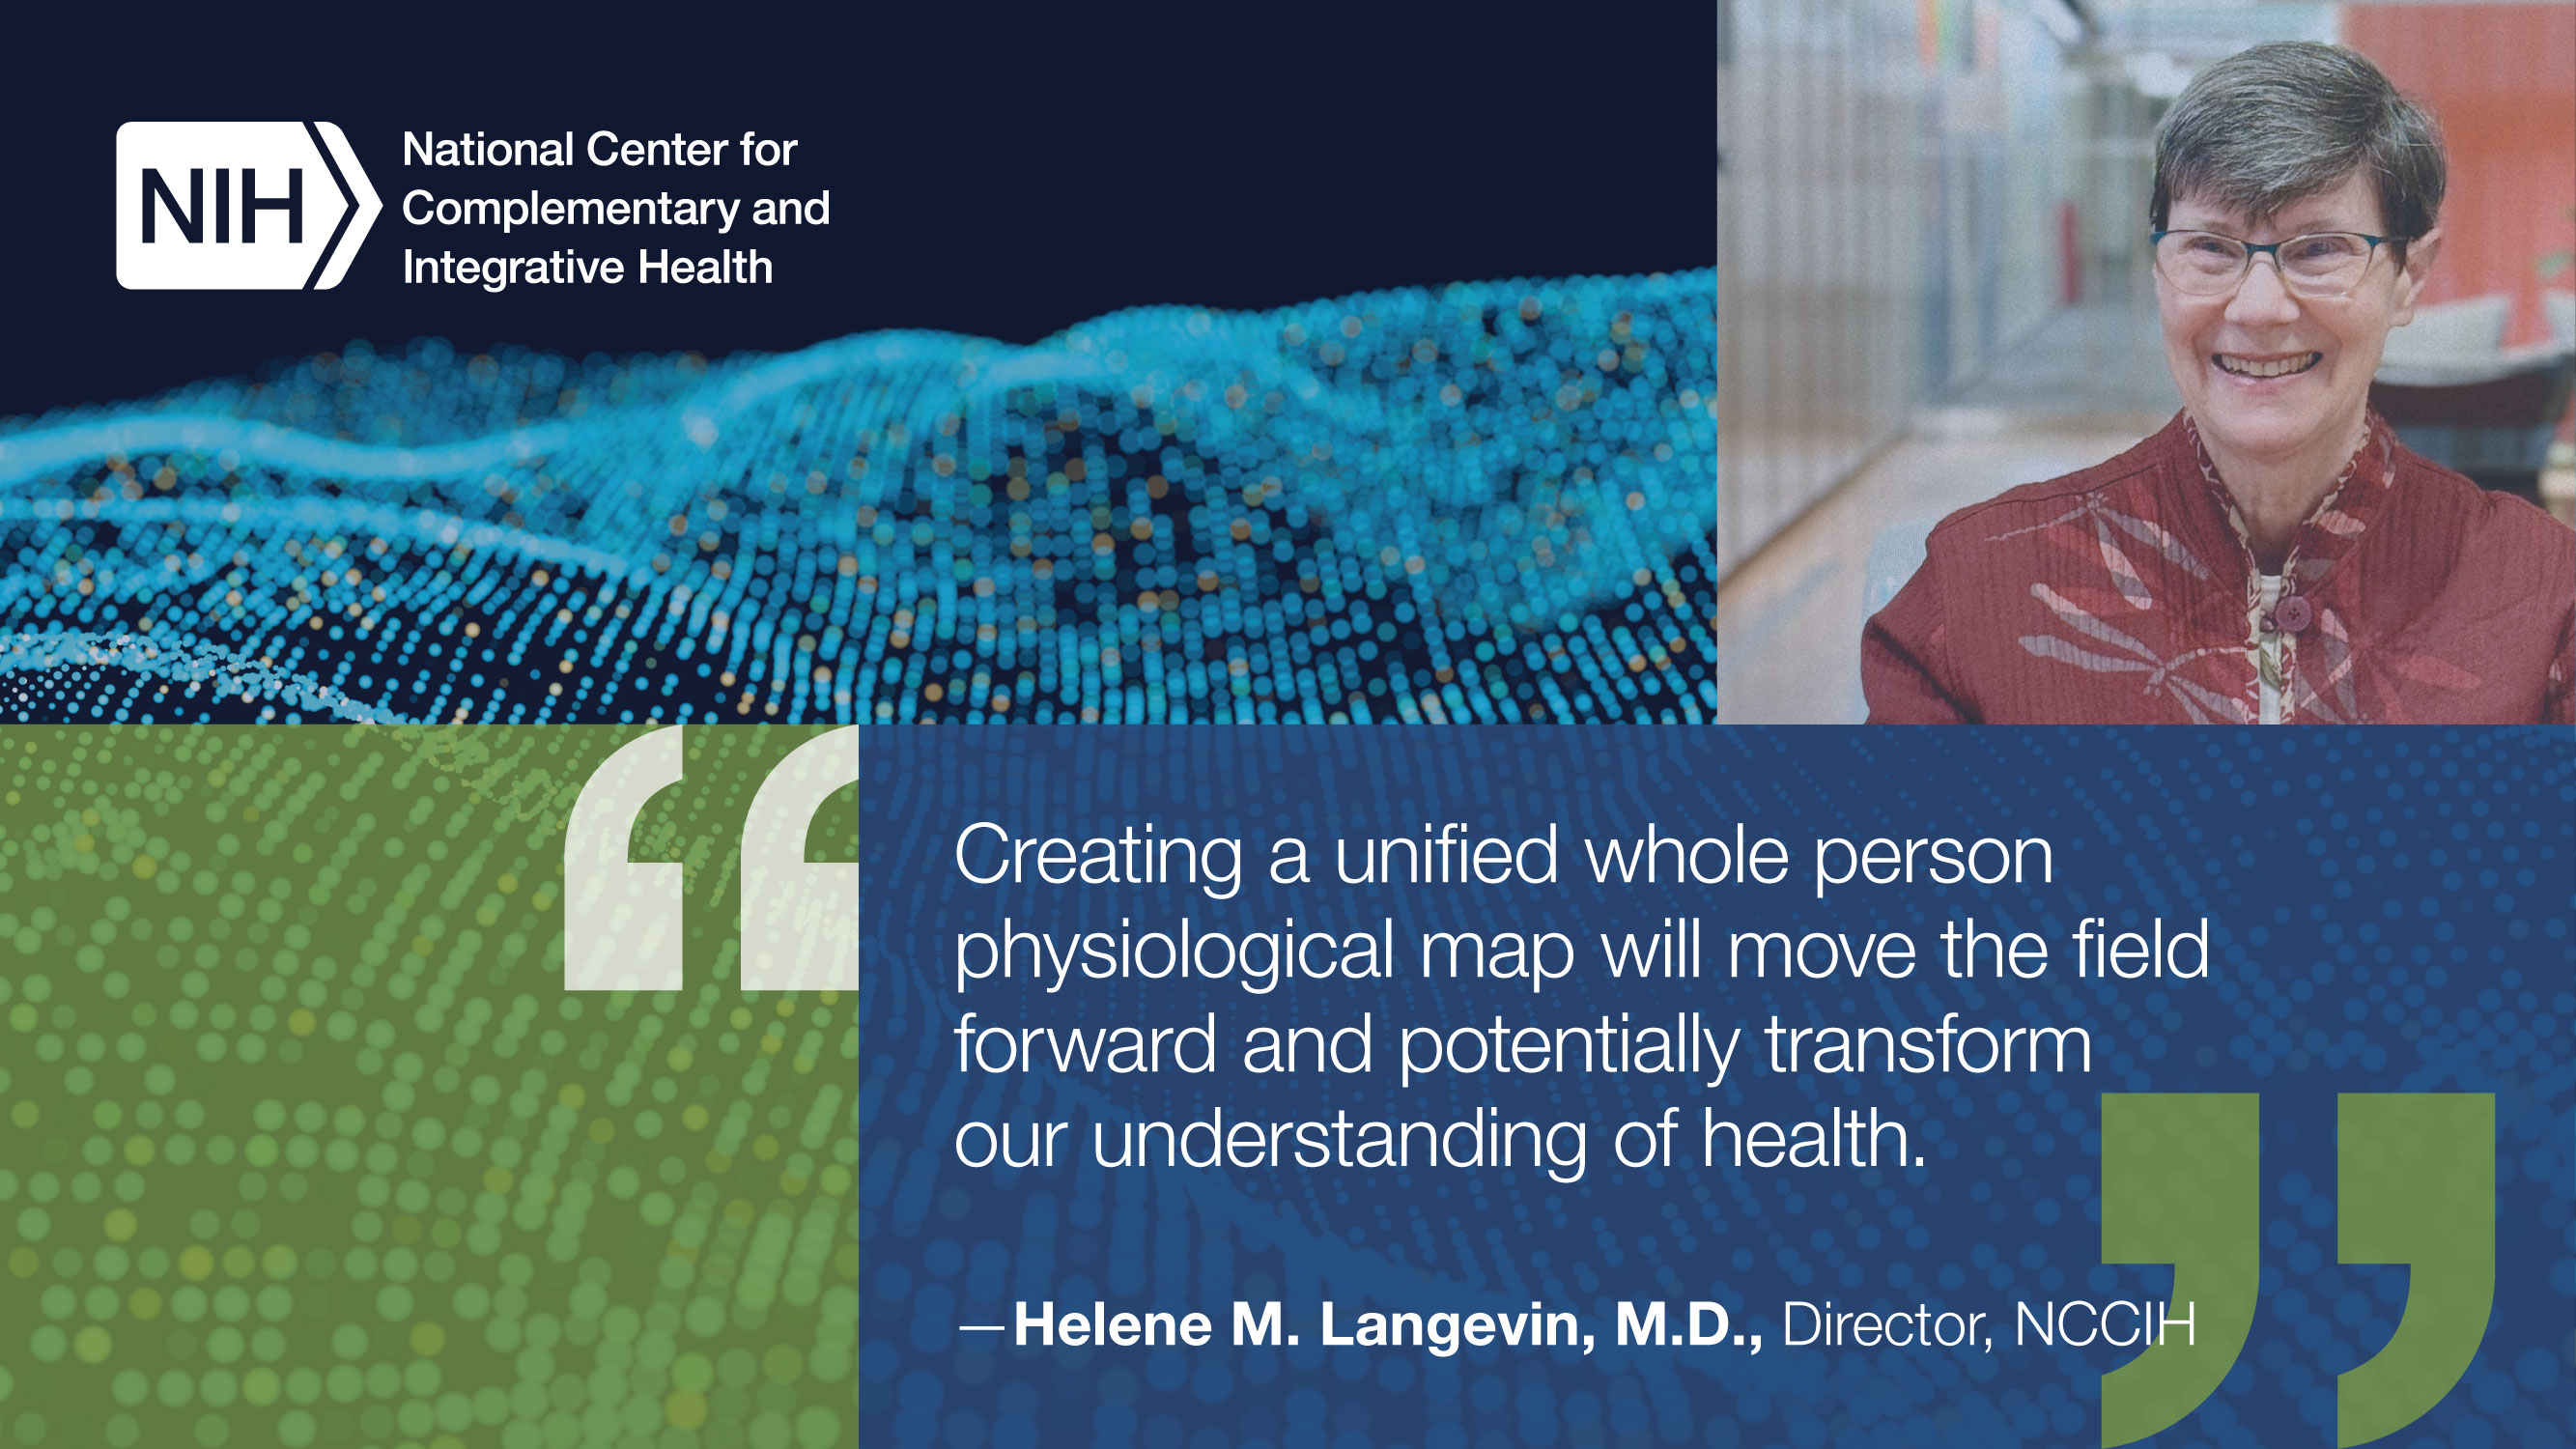 Quote from NCCIH director: "Creating a unified whole person physiological map will move the field forward and potentially transform our understanding of health." - Helene M. Langevin, M.D.